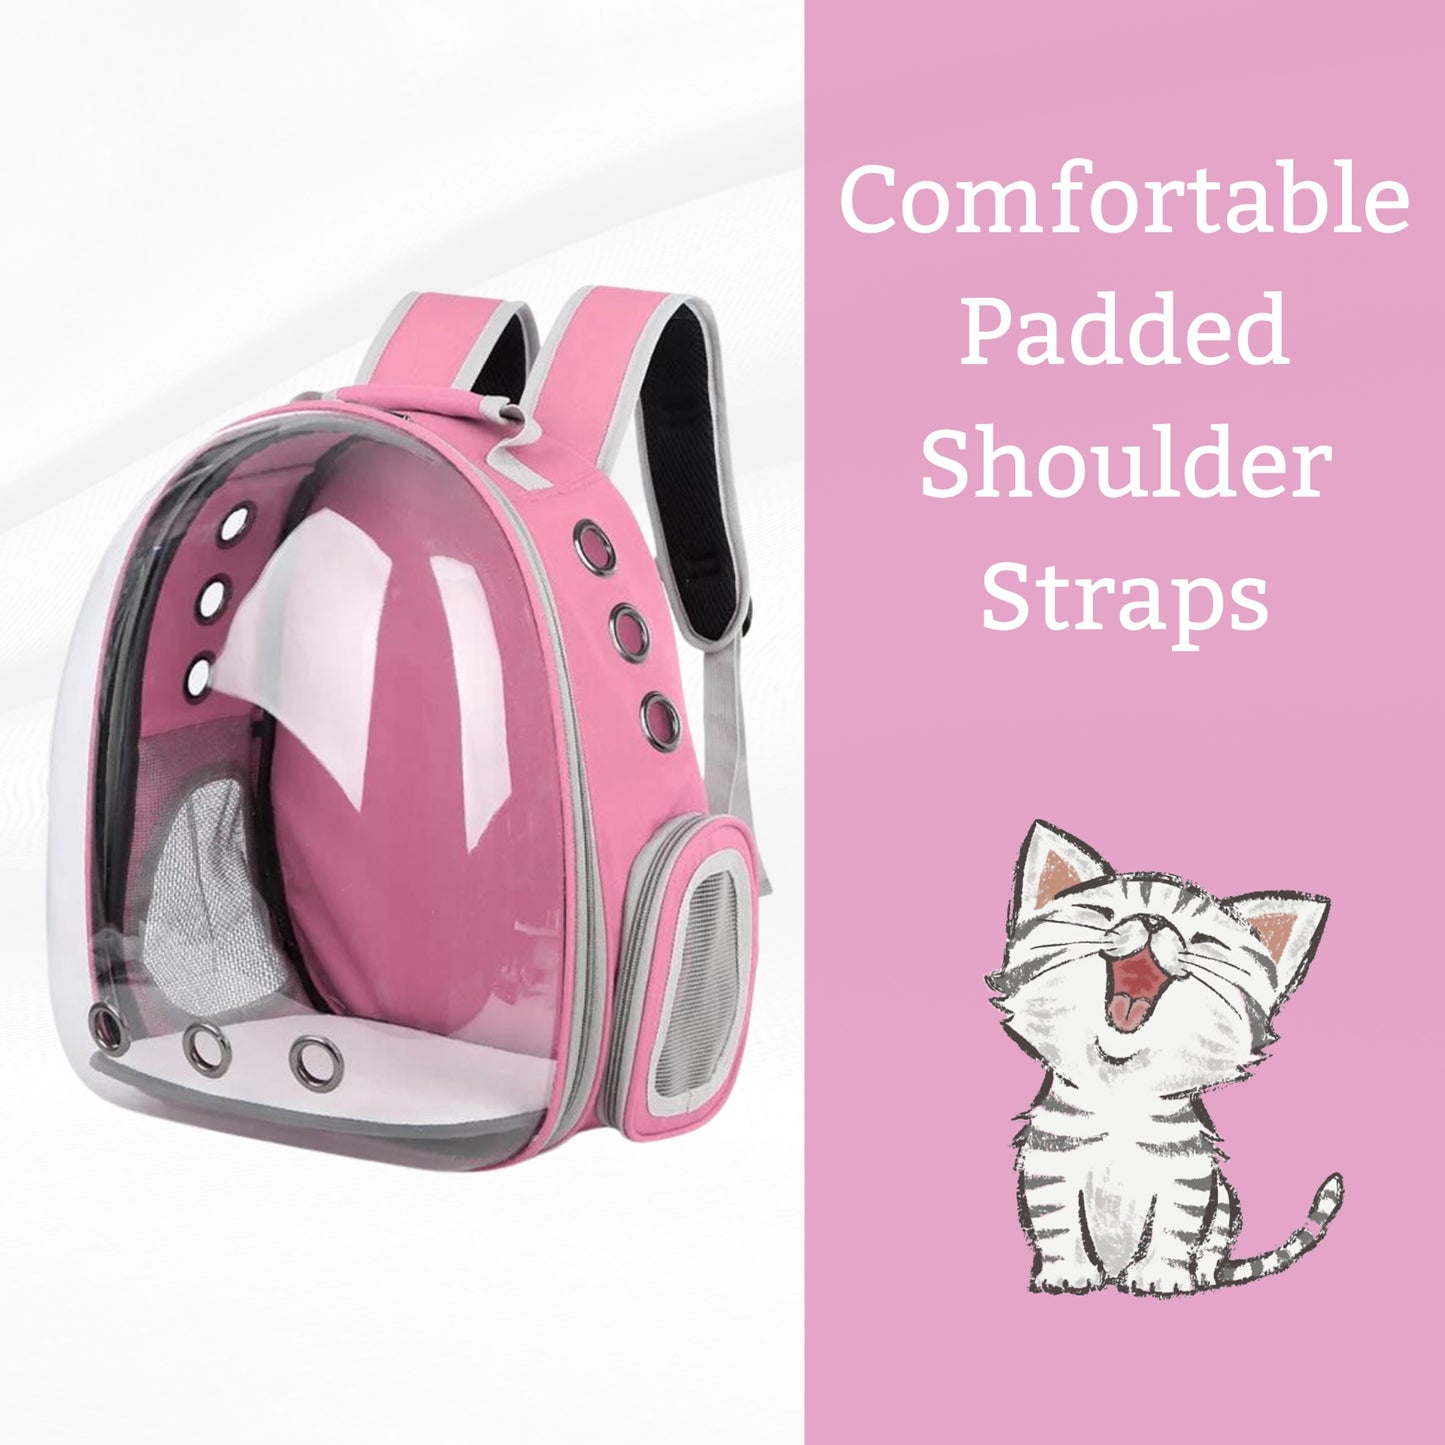 Foodie Puppies Transparent Travel Backpack for Puppies & Cats (Pink)